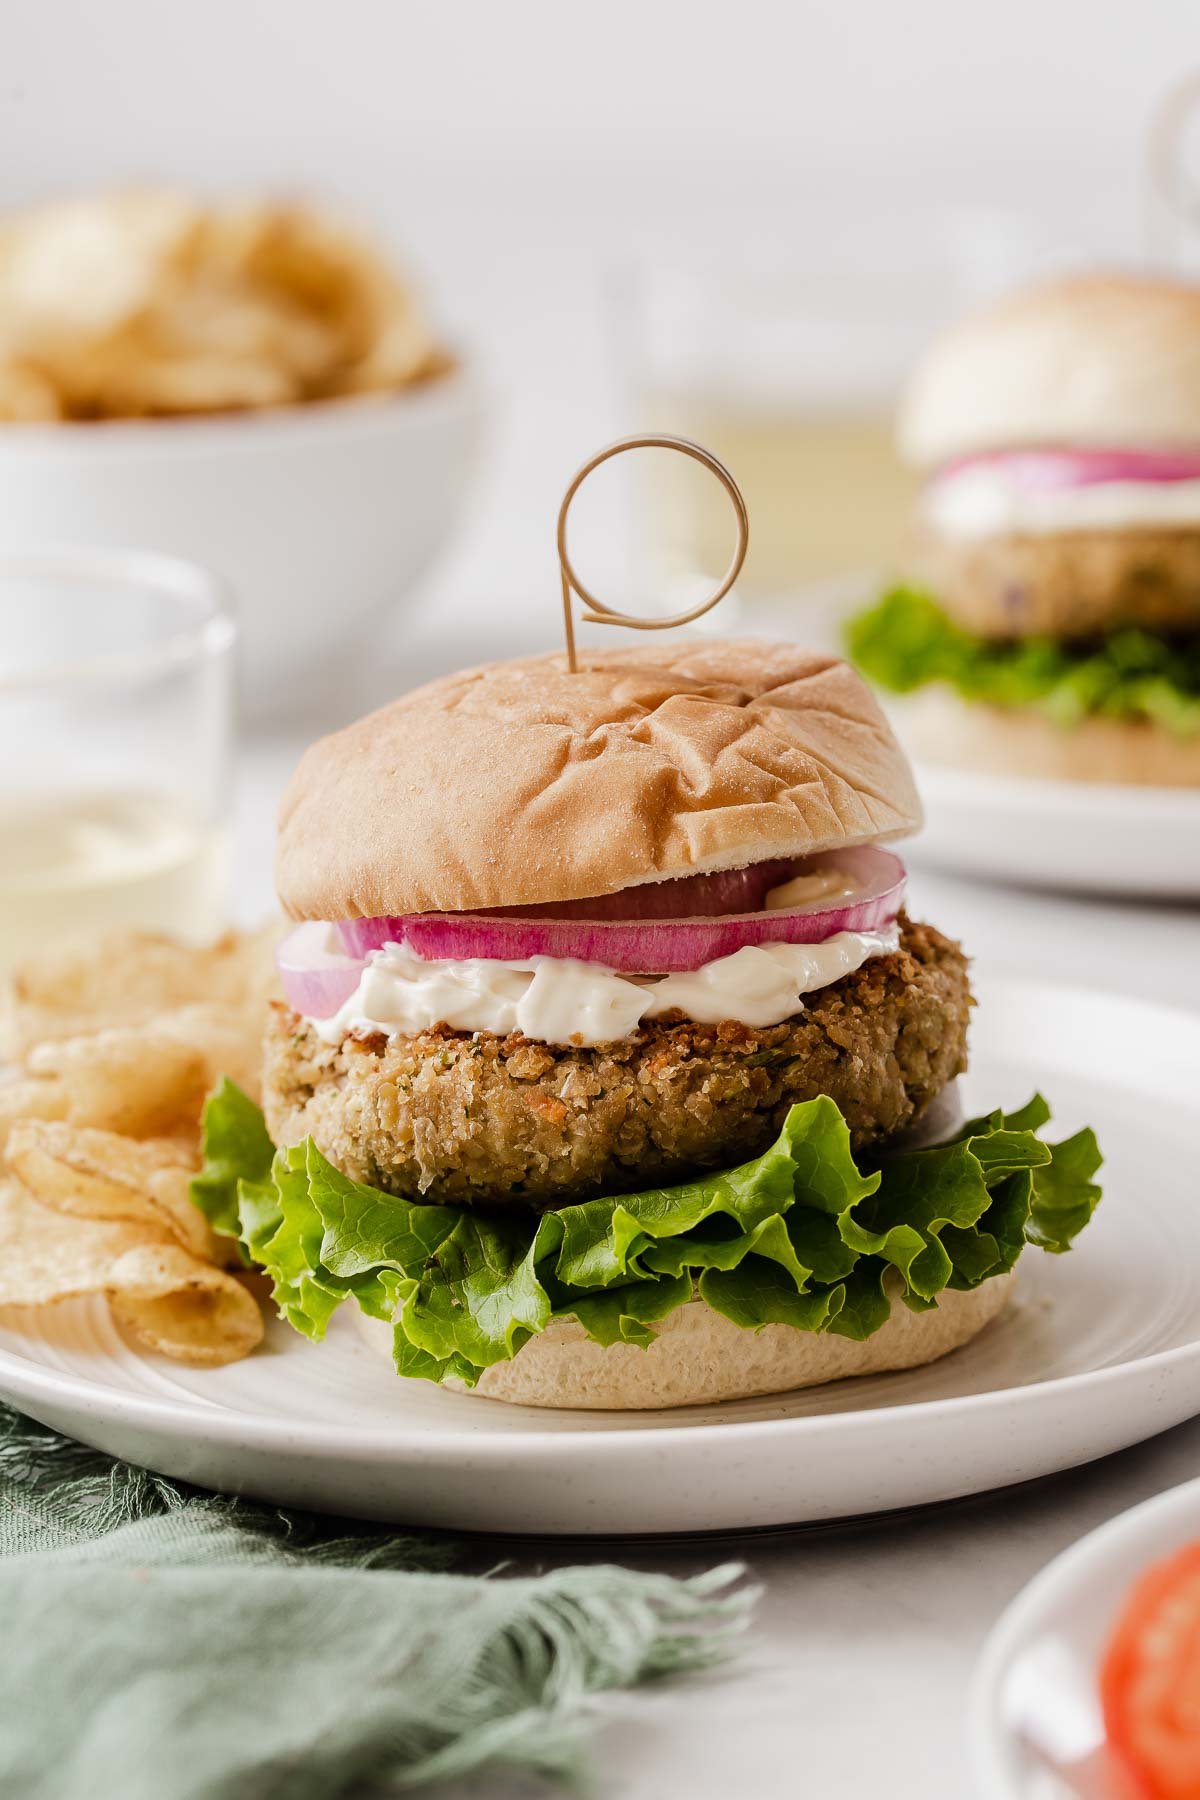 Vertical image of chickpea burgers on bun with lettuce, mayo and a slice of tomato.